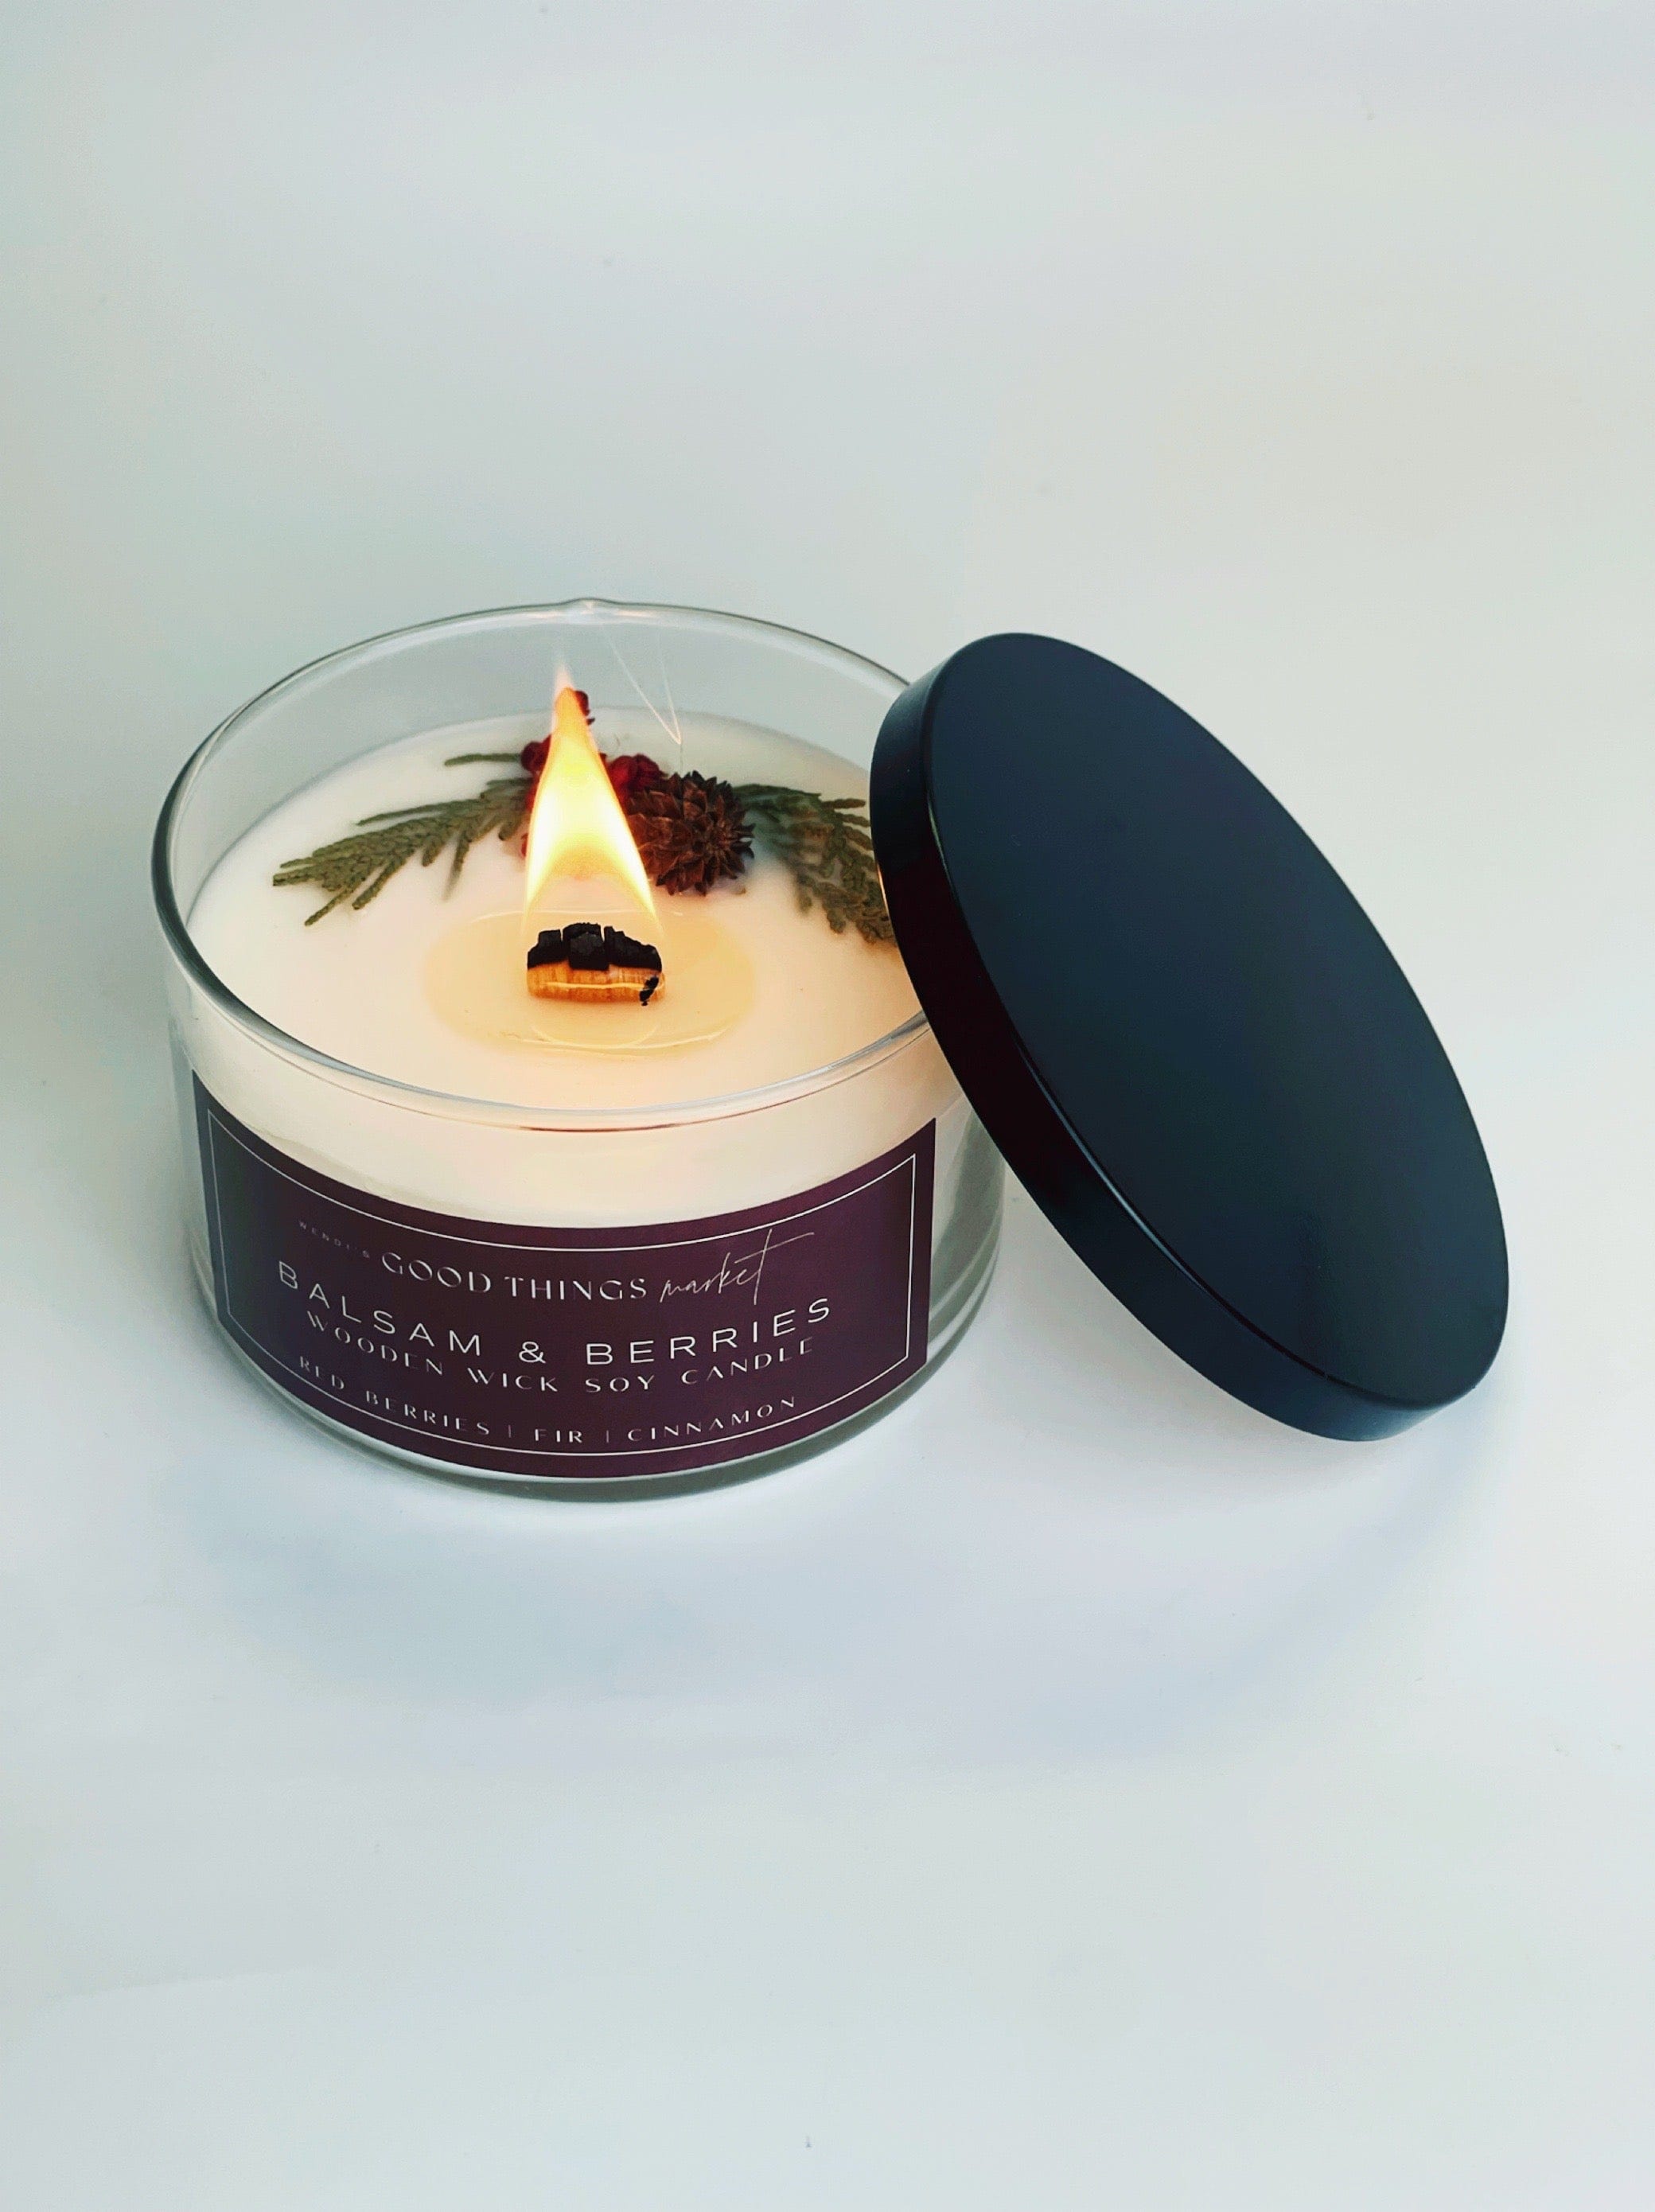 wooden wick soy candle, Wendi's Good Things Market